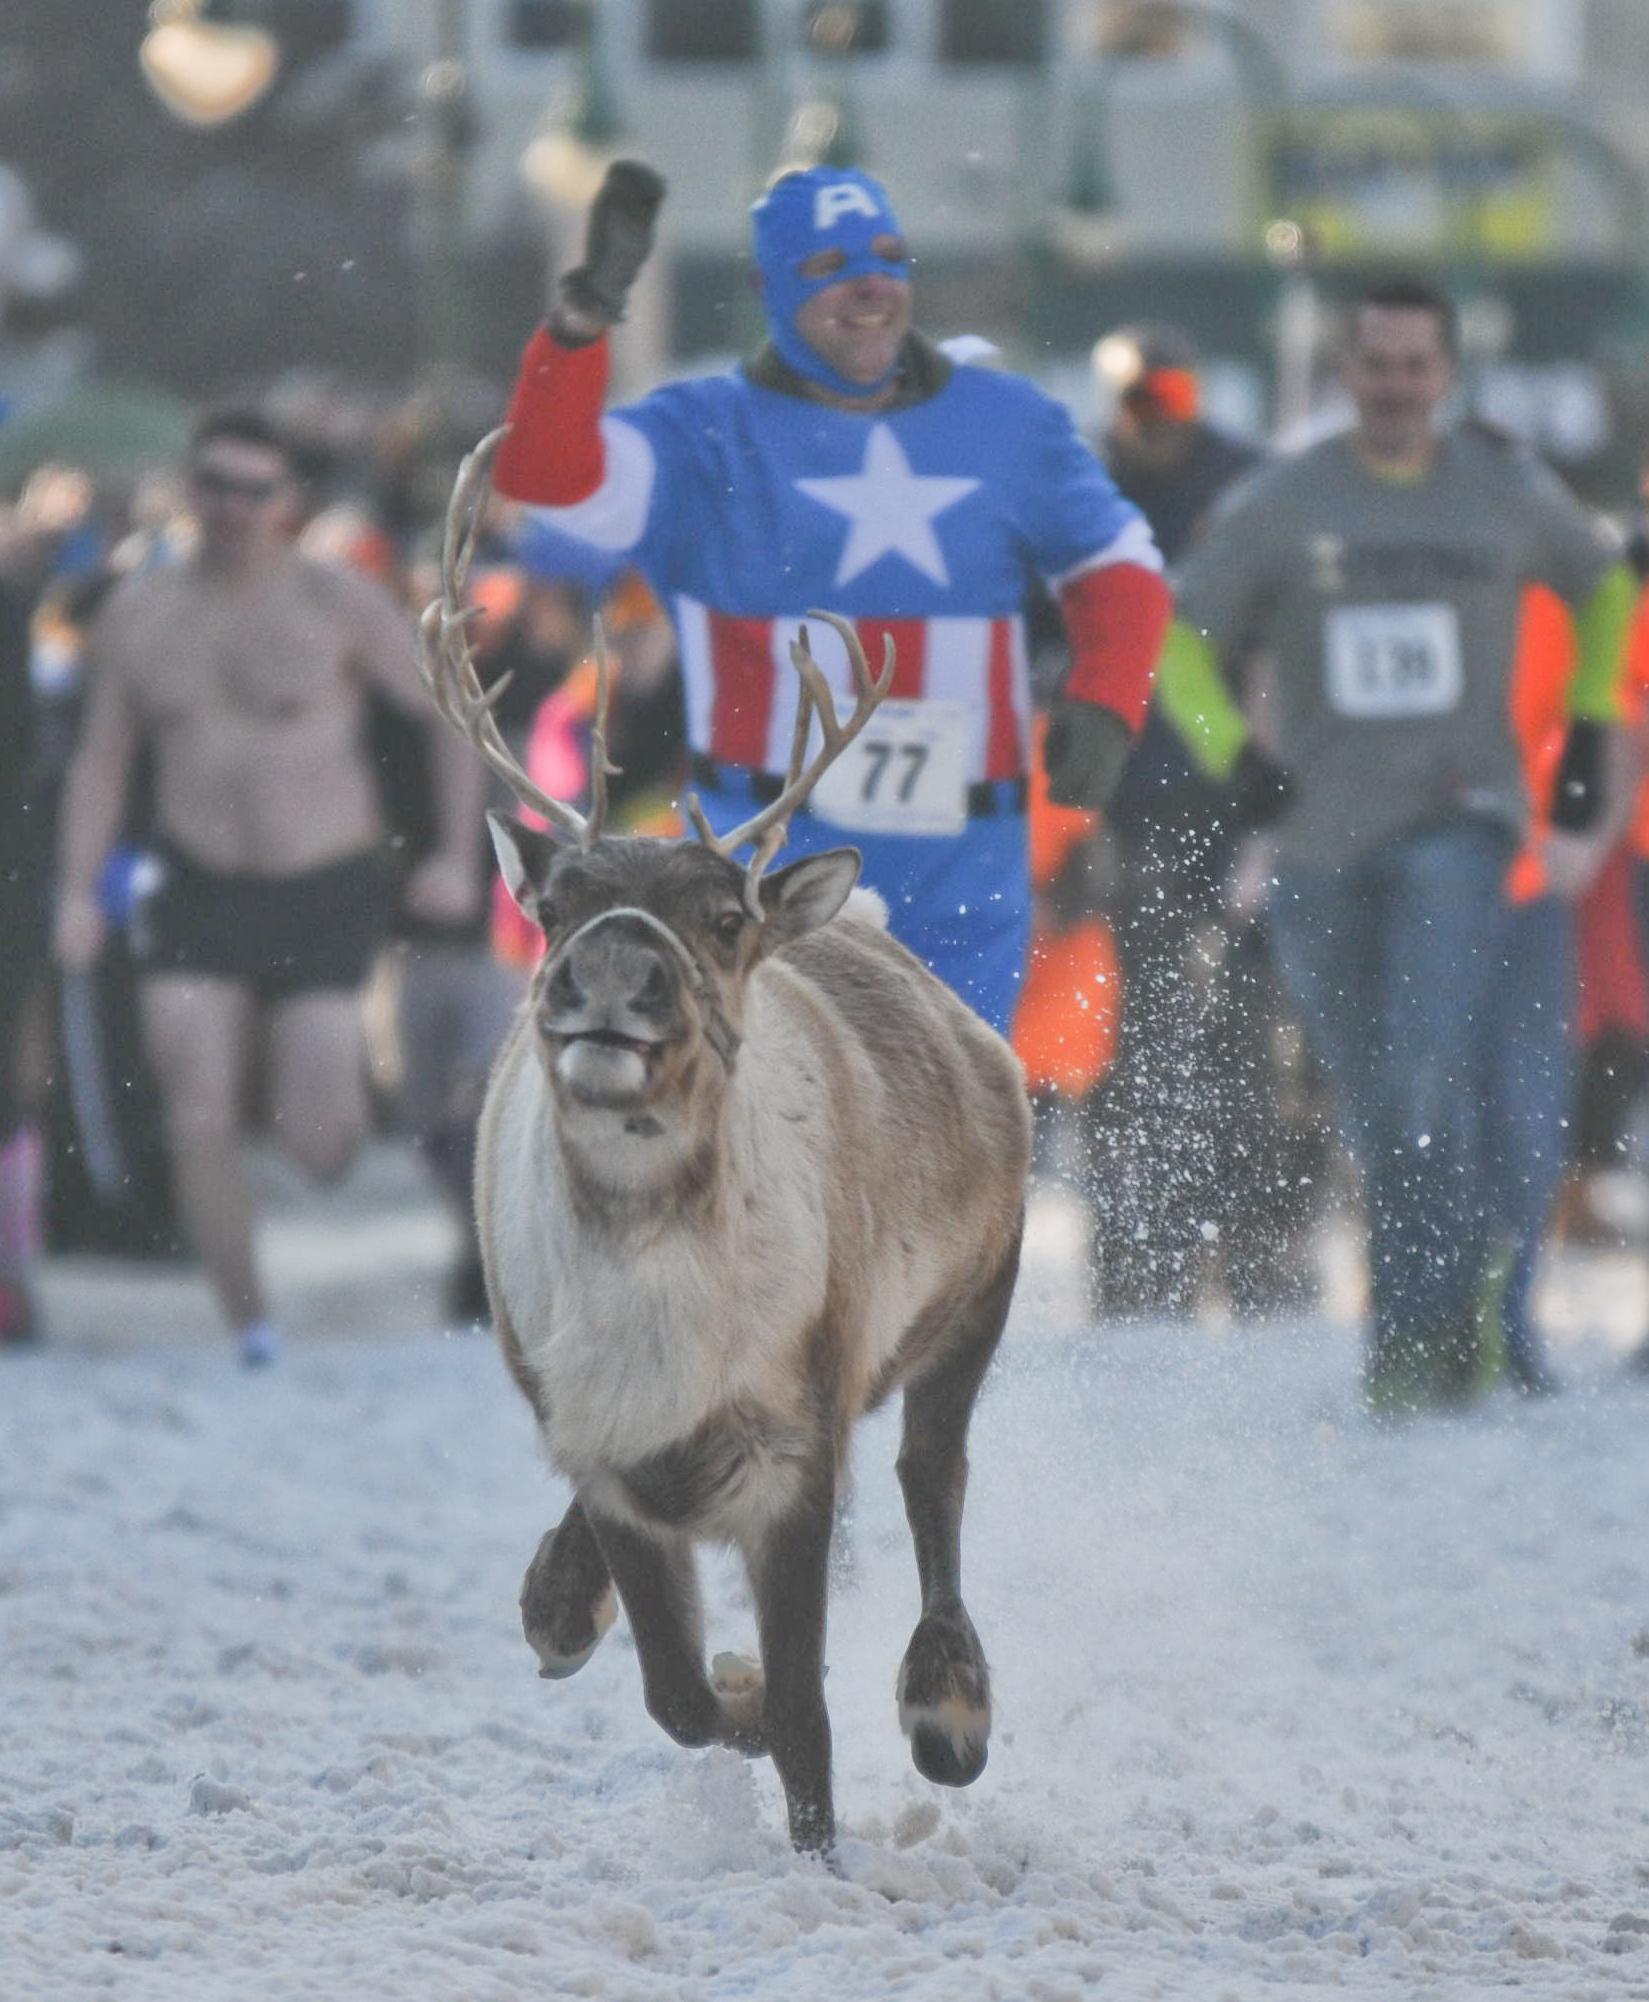 a reindeer running on snow in front of people